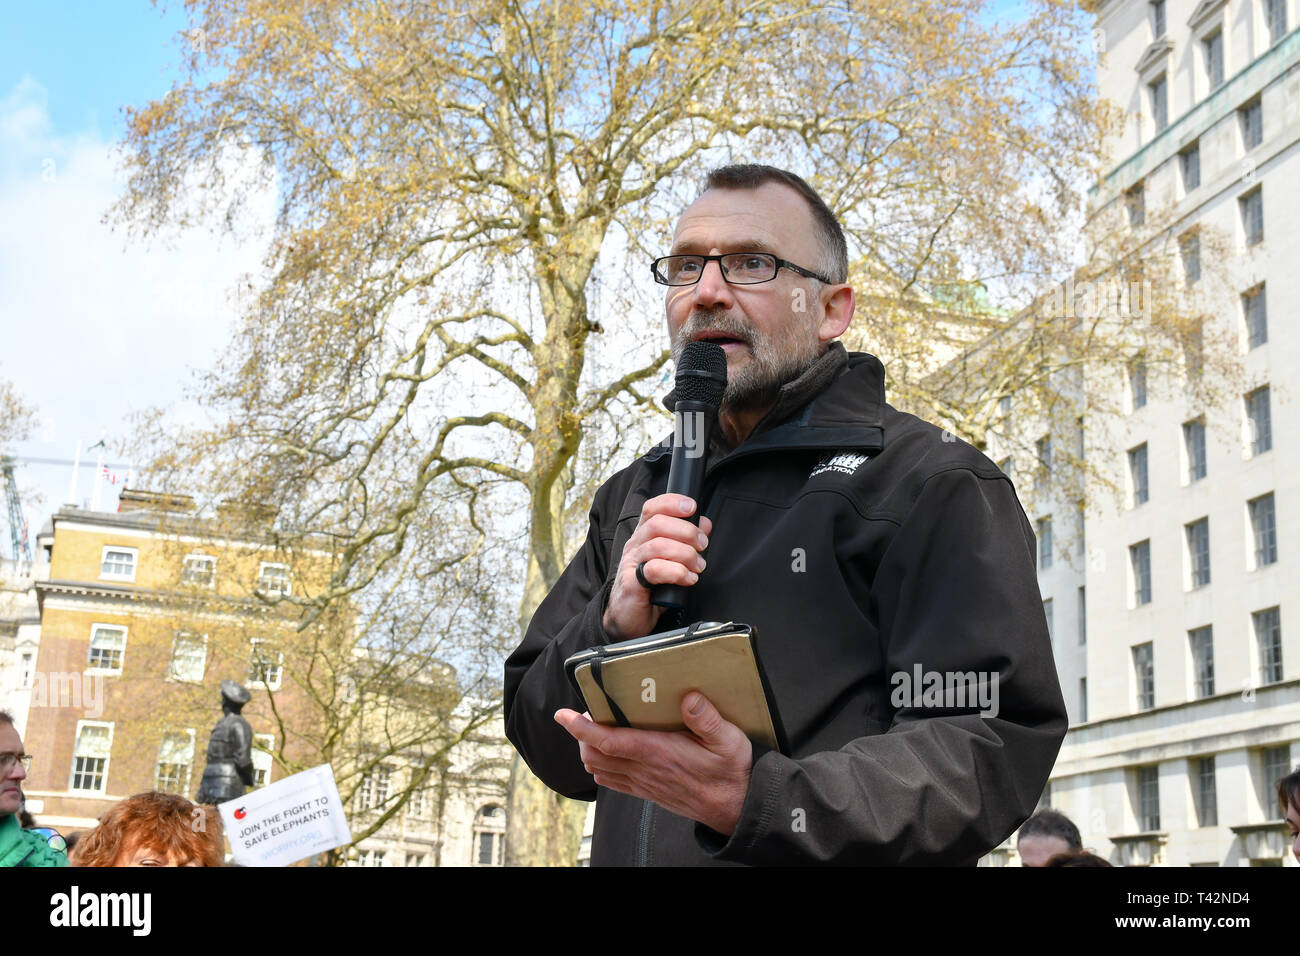 London, UK. 13th April 2019. Speaker Eduardo Goncalves - Founder - Campaign to Ban Trophy Hunting rally at the 5th Global March for Elephants and Rhinos march against extinction and trophy hunting murdering and killing animals for blood spots and ivory trade outside downing street on 13 April 2019, London, UK. Credit: Picture Capital/Alamy Live News Stock Photo